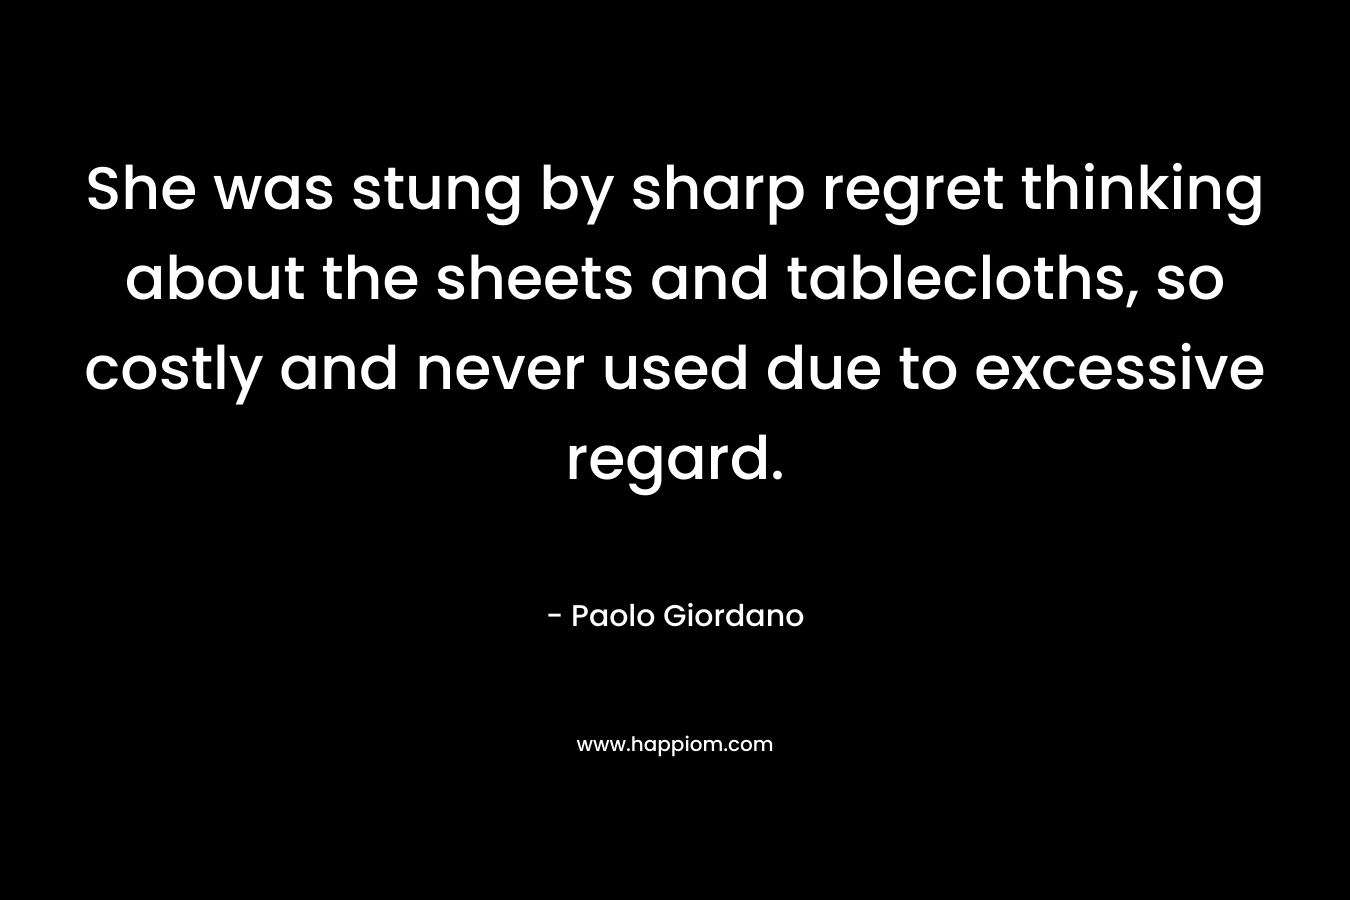 She was stung by sharp regret thinking about the sheets and tablecloths, so costly and never used due to excessive regard. – Paolo Giordano